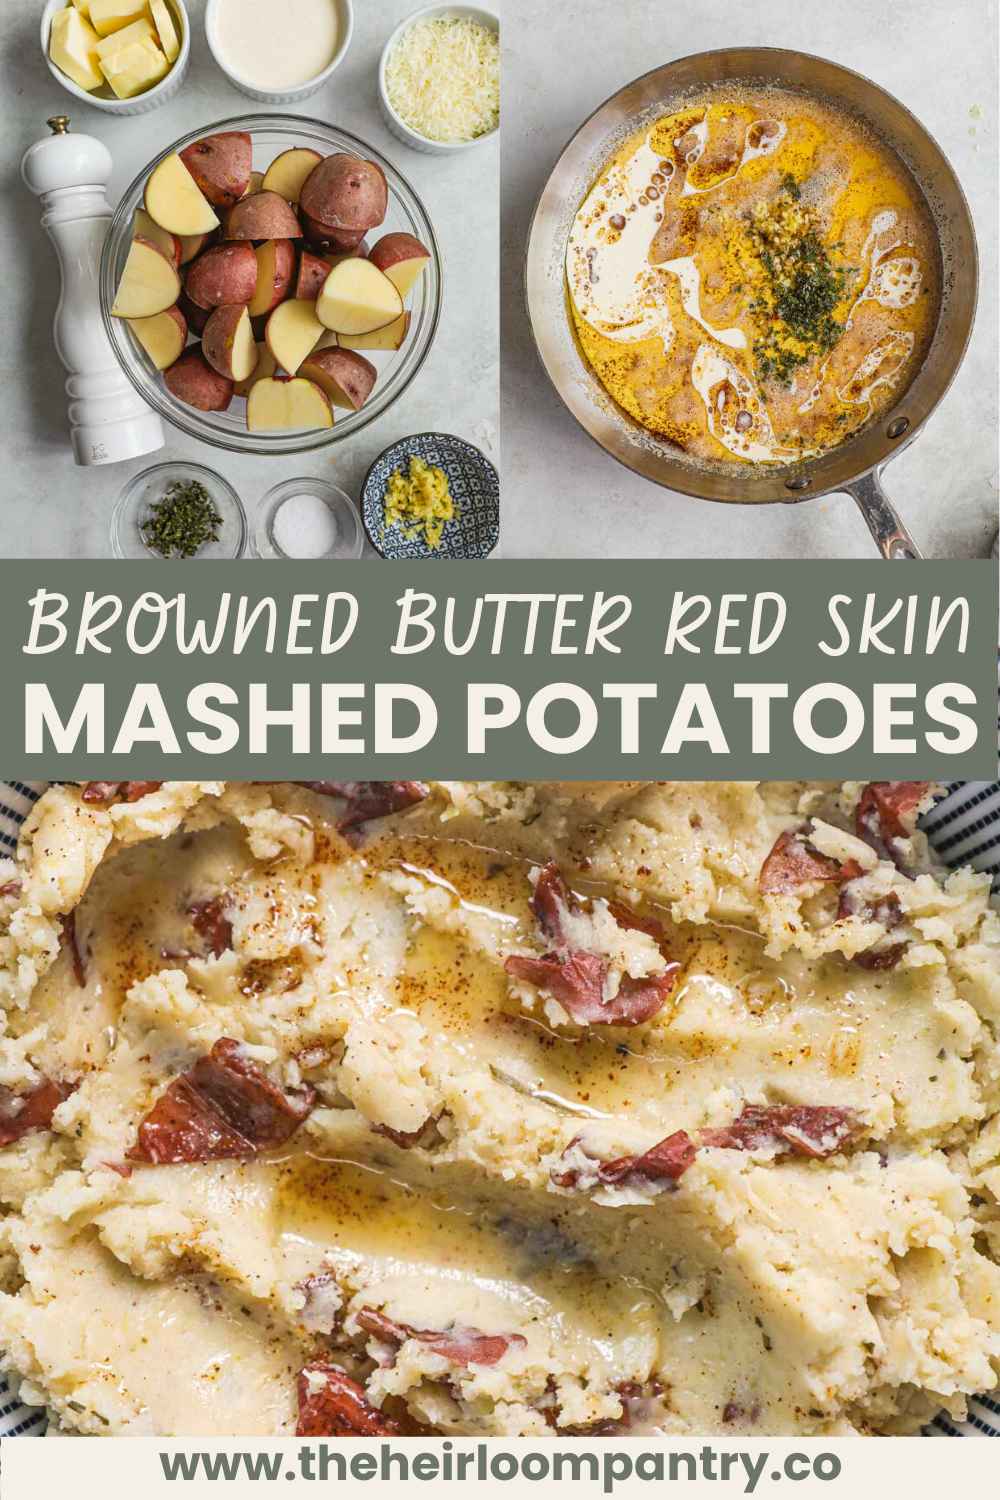 Browned butter mashed potatoes with red skin Pinterest pin.